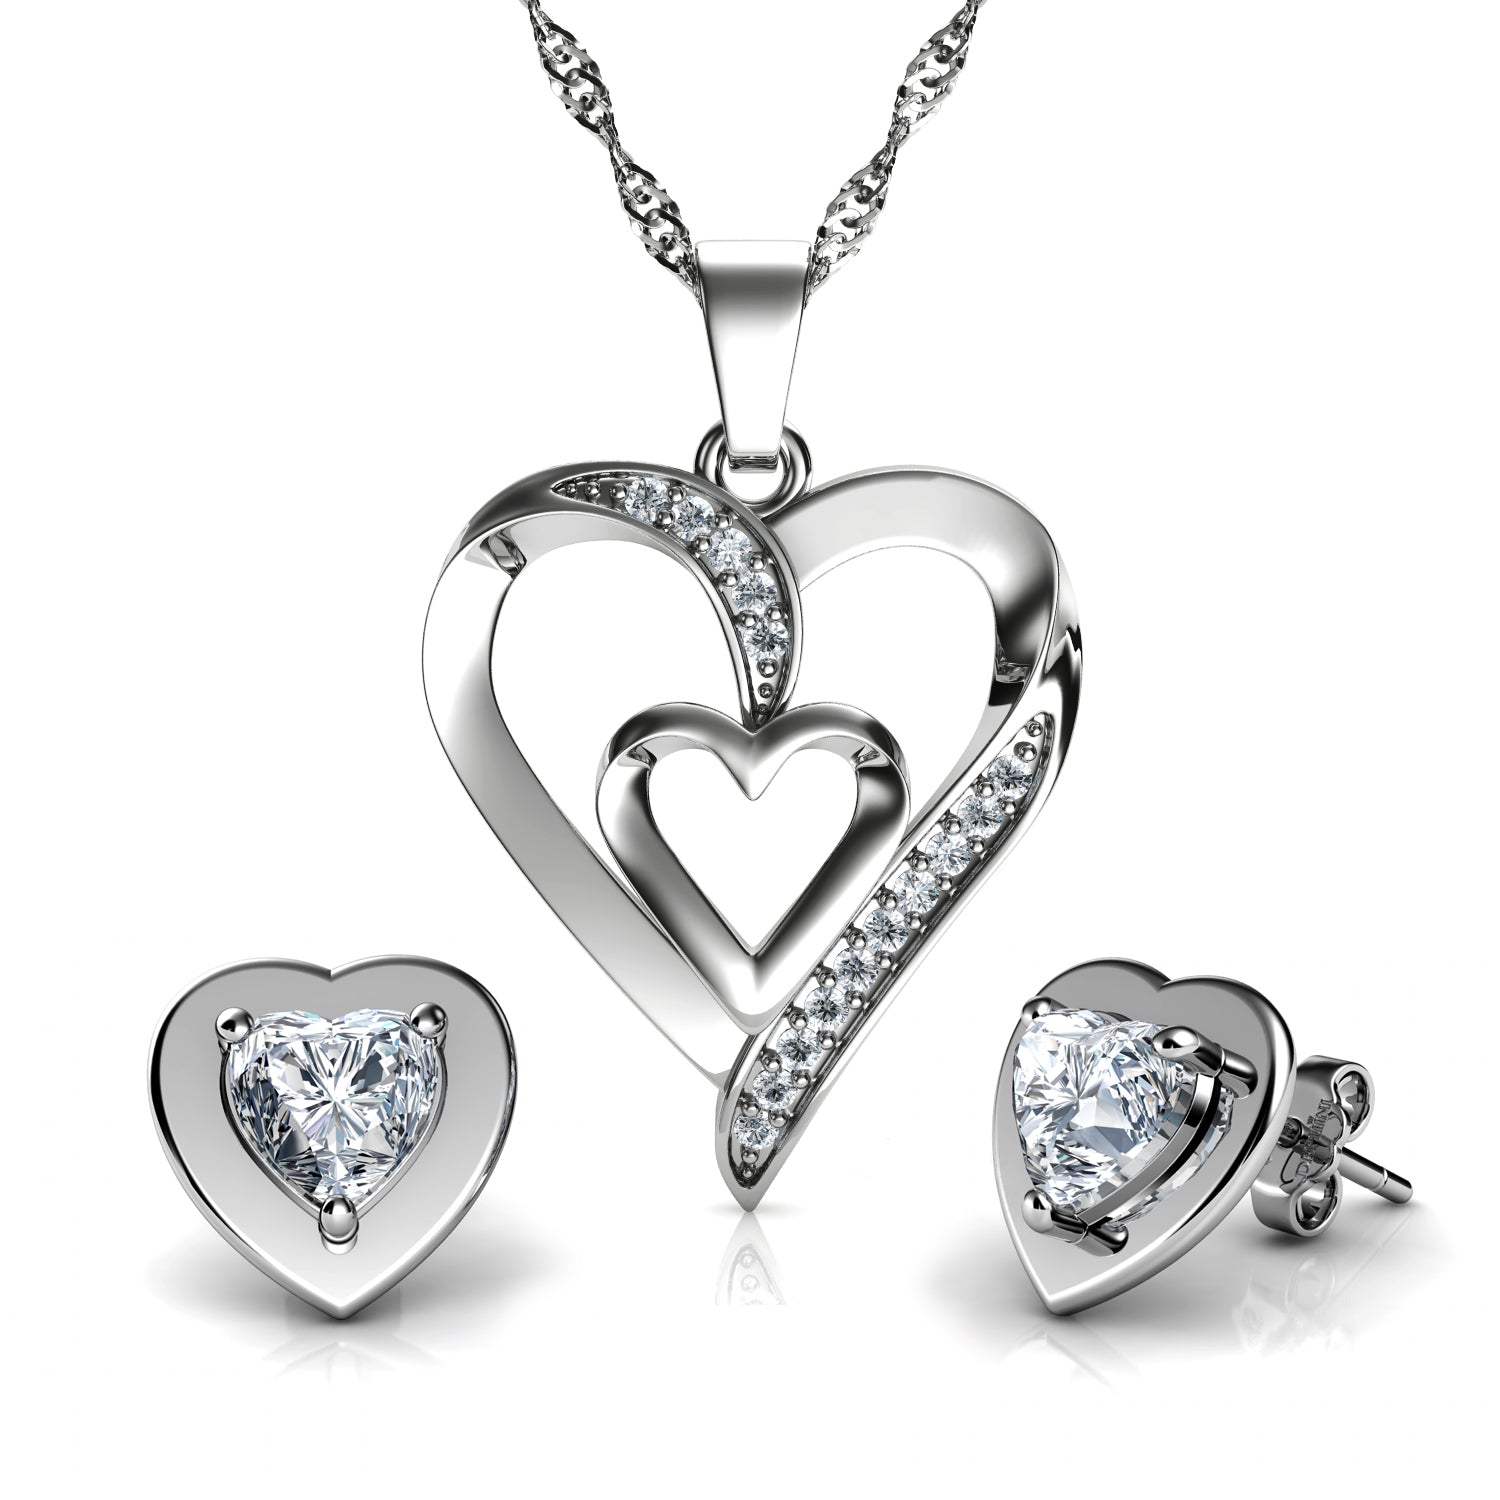 Real 925 Silver Heart Shaped Diamond Ring Pendant Necklace Earrings Jewelry  Set